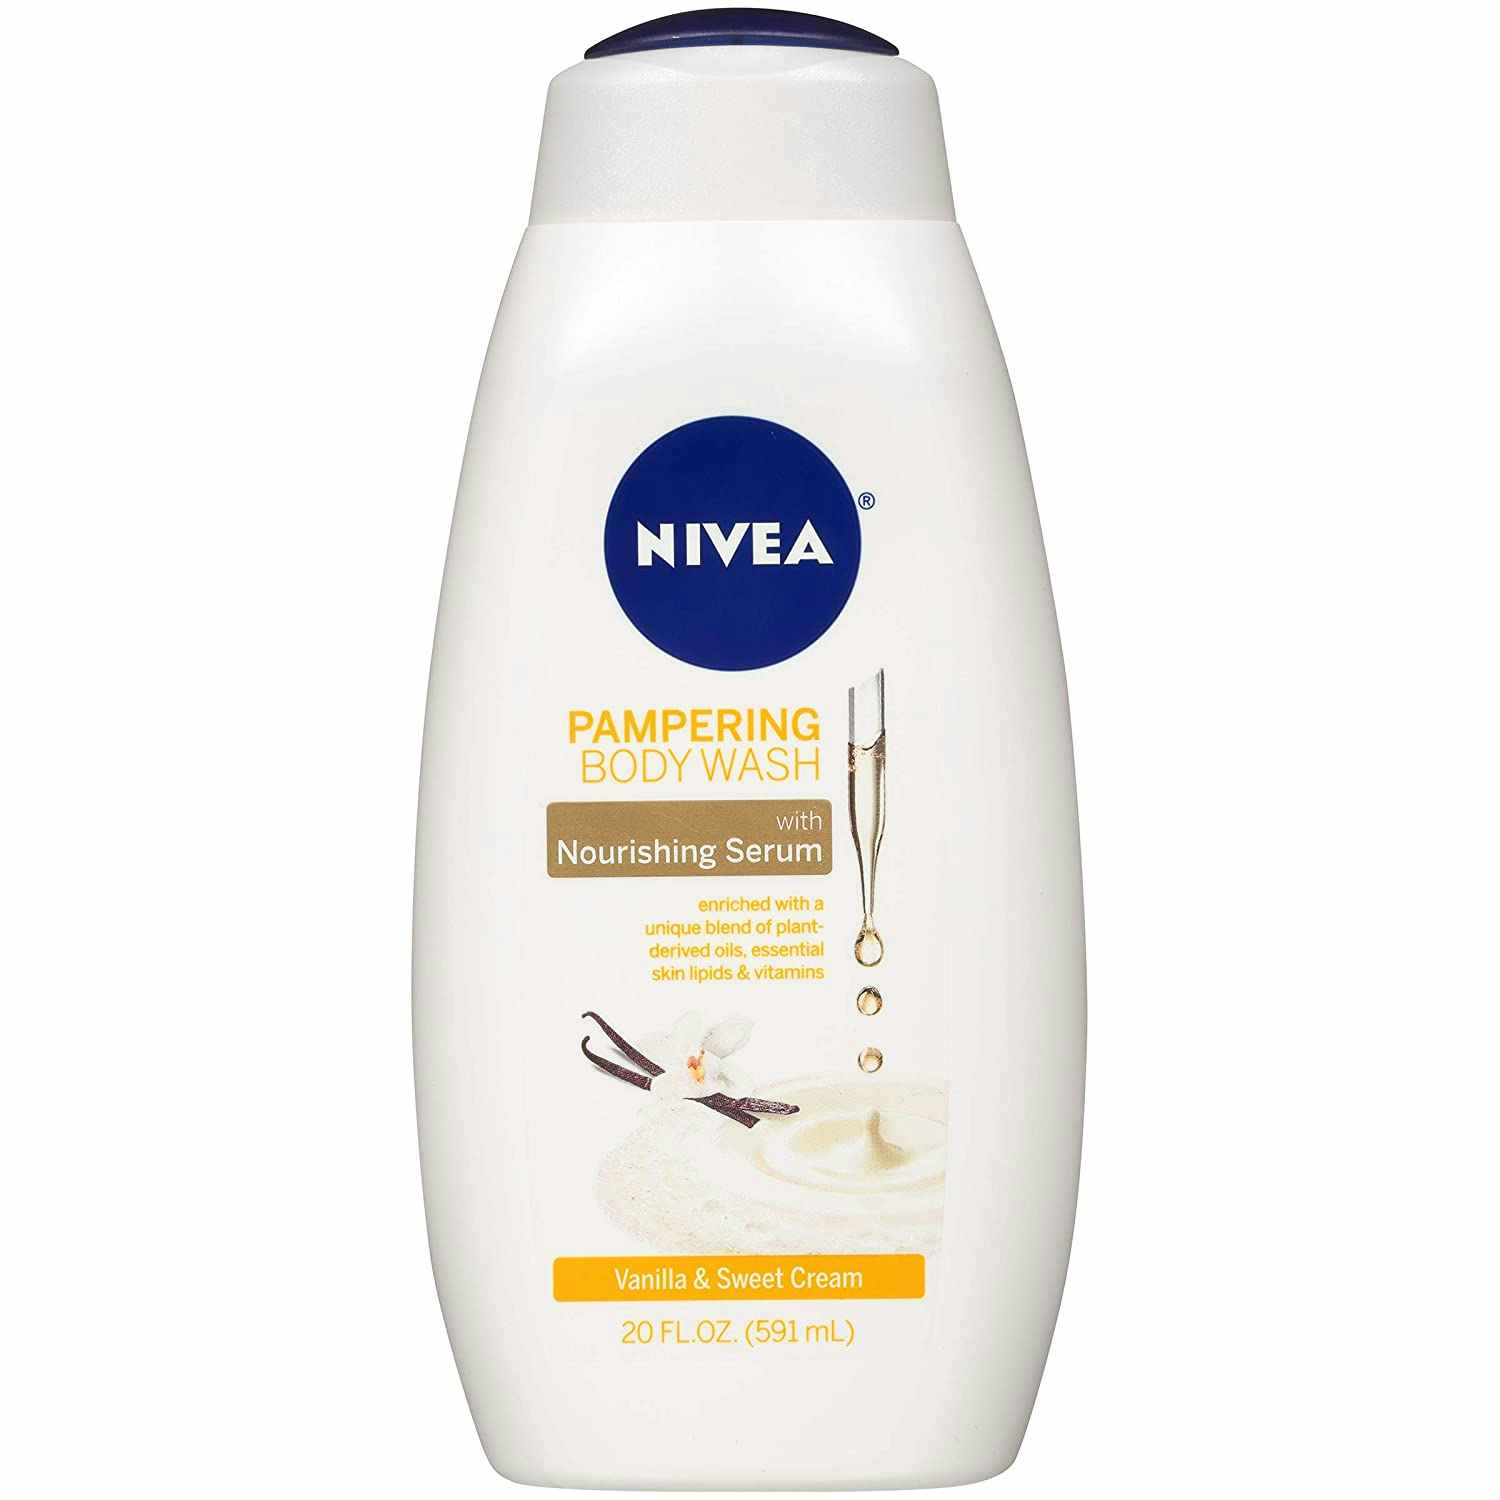 A bottle of Nivea body wash in the vanilla and sweet cream scent.